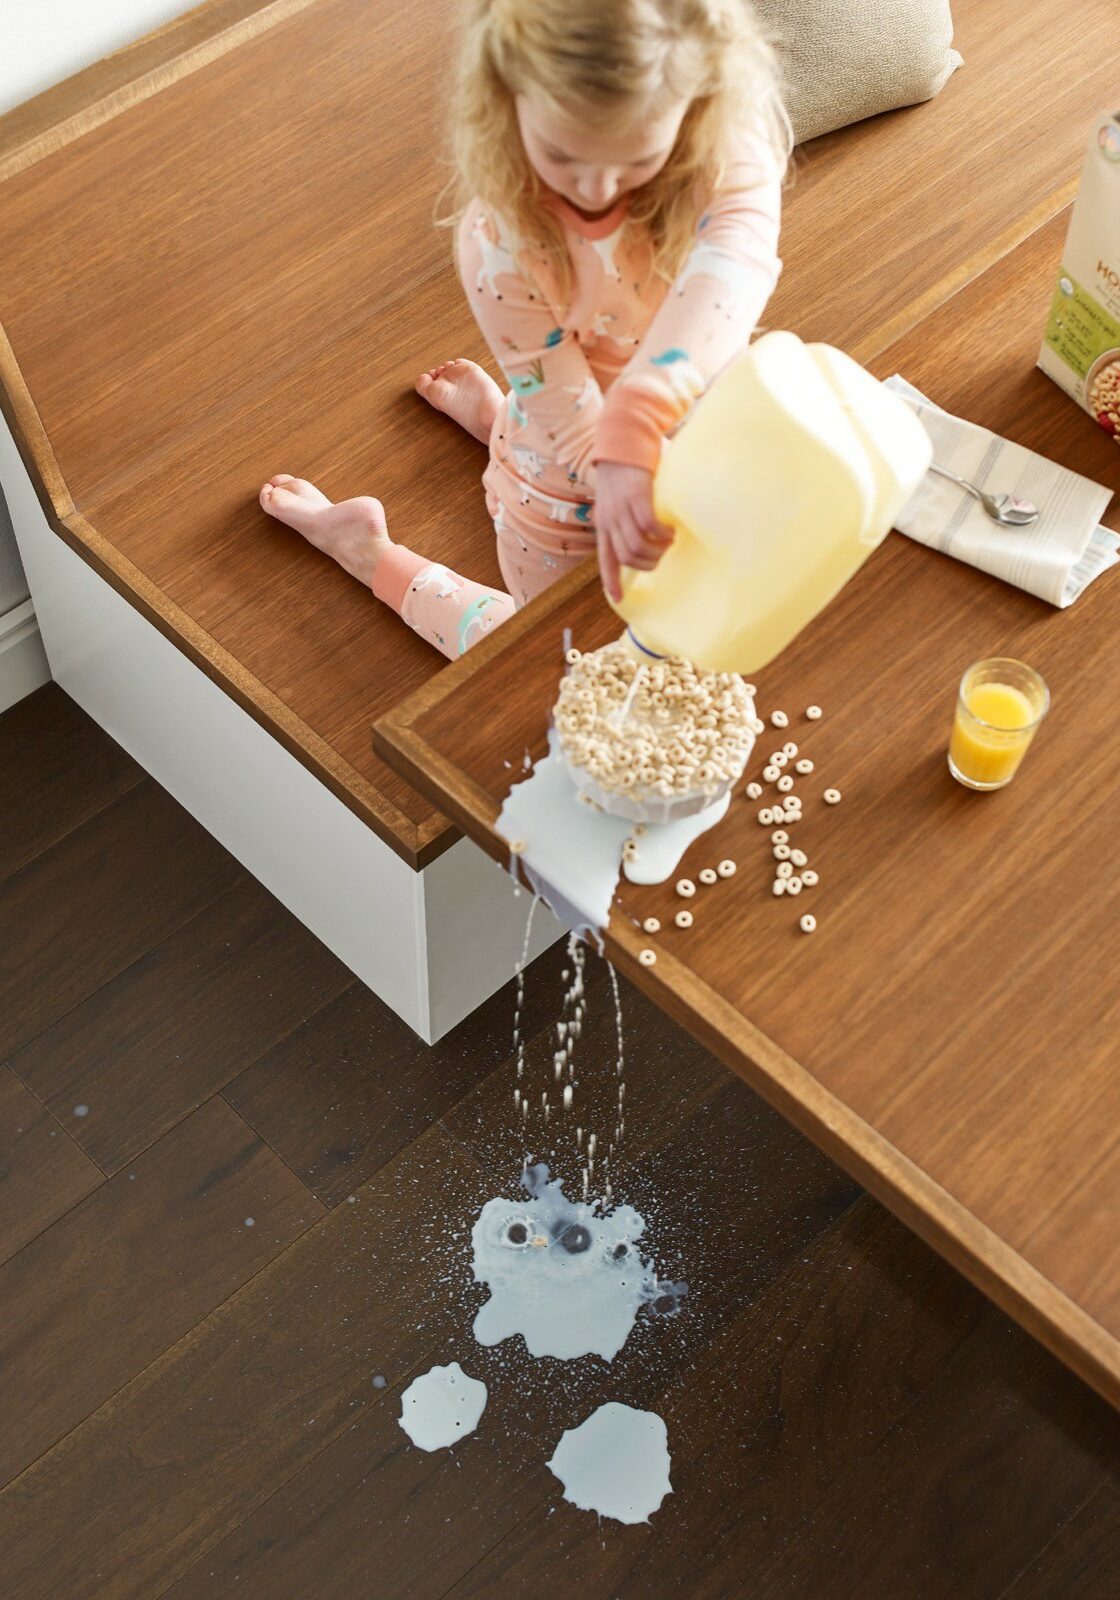 Milk spill cleaning | McKean's Floor to Ceiling